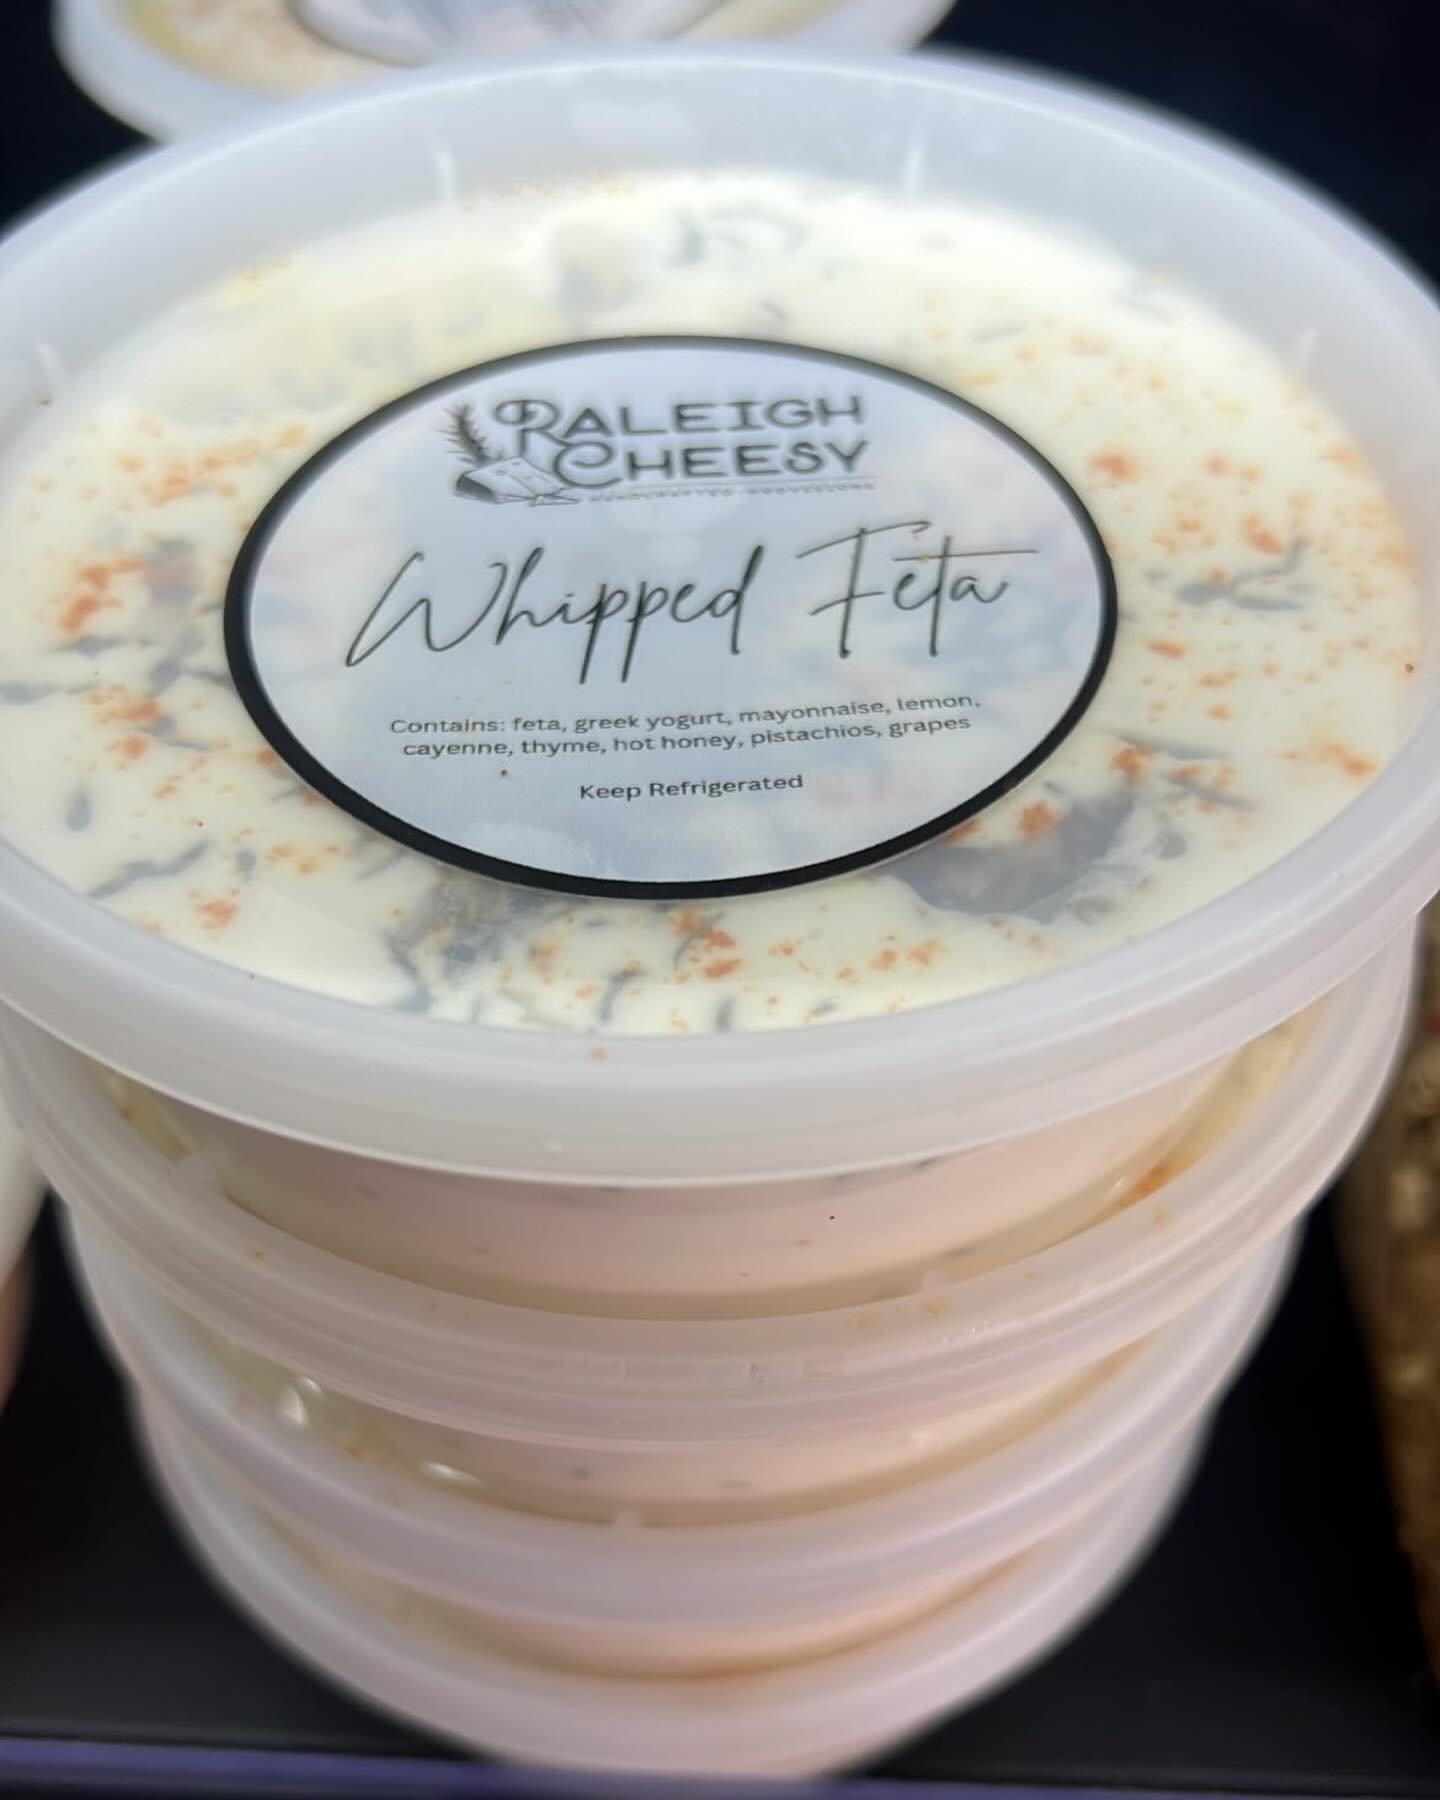 Our top 4 favorite dips right now in the front fridge!
.
1) Whipped Feta - filled with lemon, thyme, hot honey and a touch of heat. Enjoy it on a sandwich or a crostini!
.
2) Pimento Cheese - packed with 3 cheeses and a variety of secret spices, our 